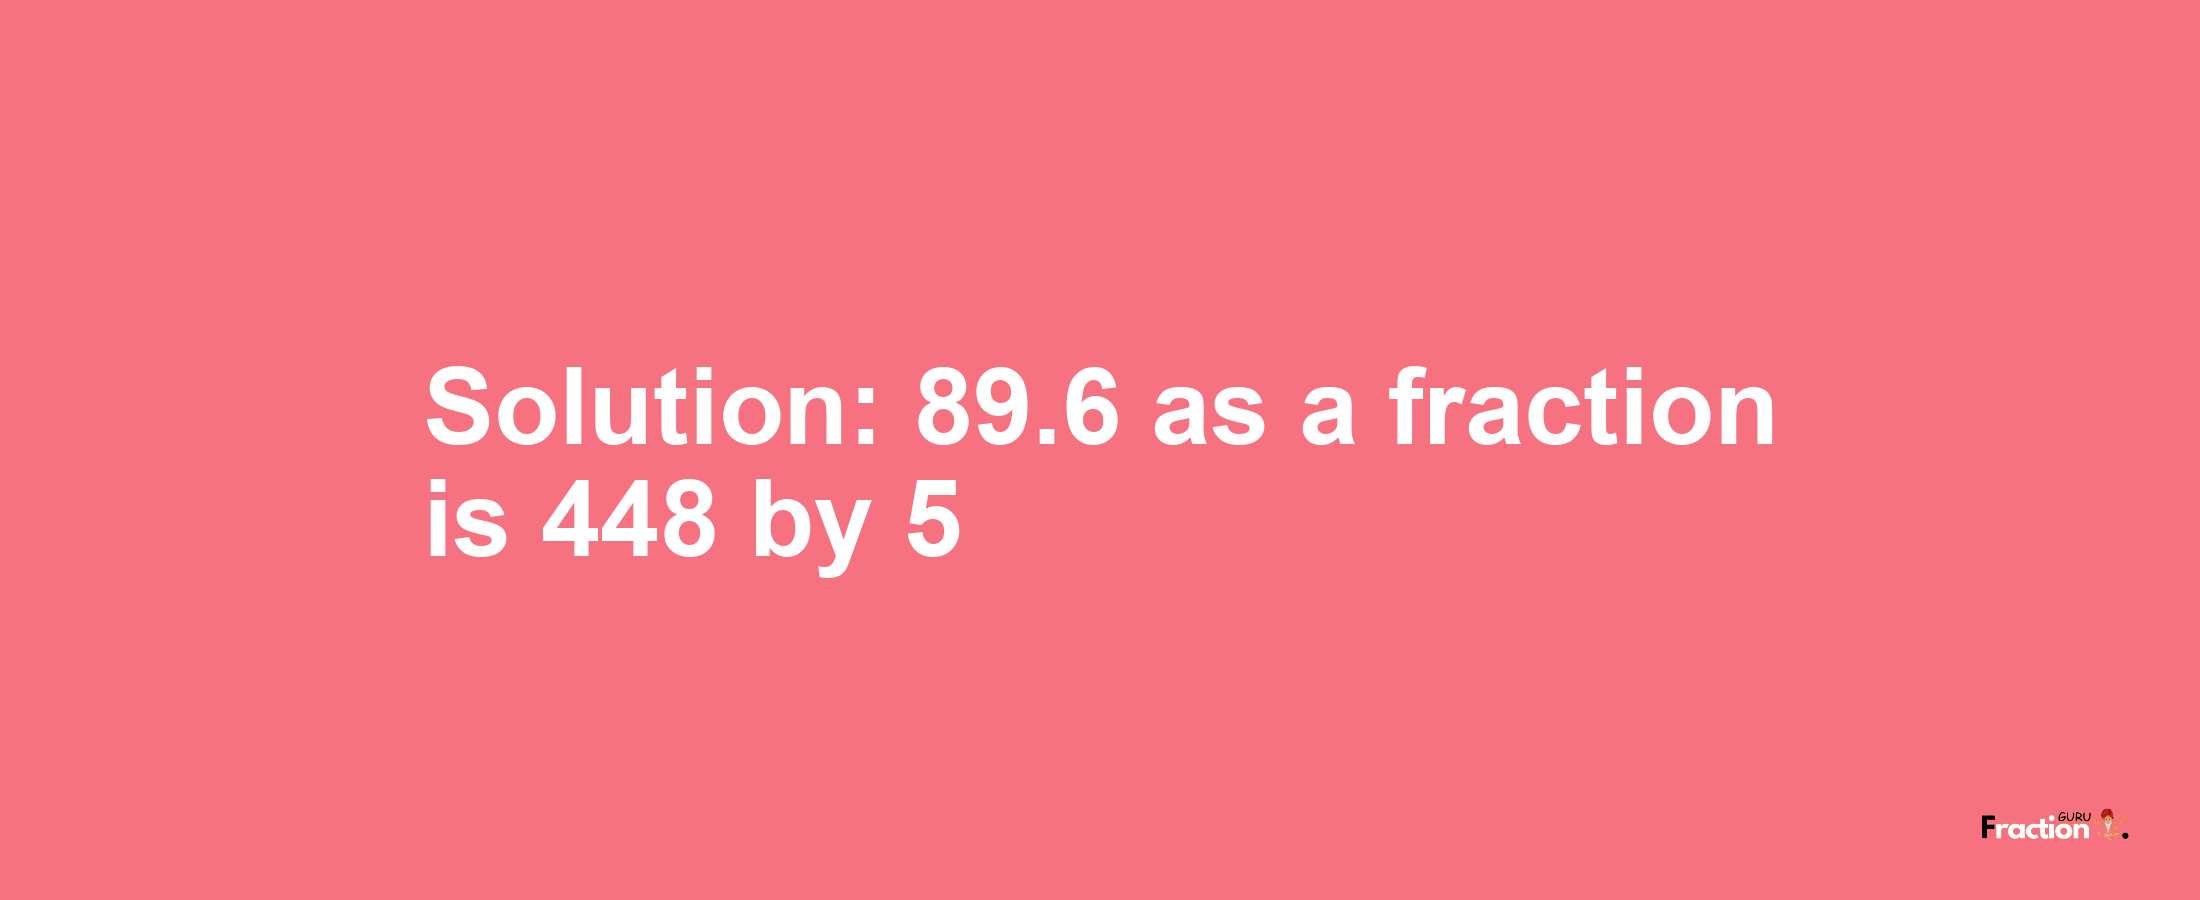 Solution:89.6 as a fraction is 448/5